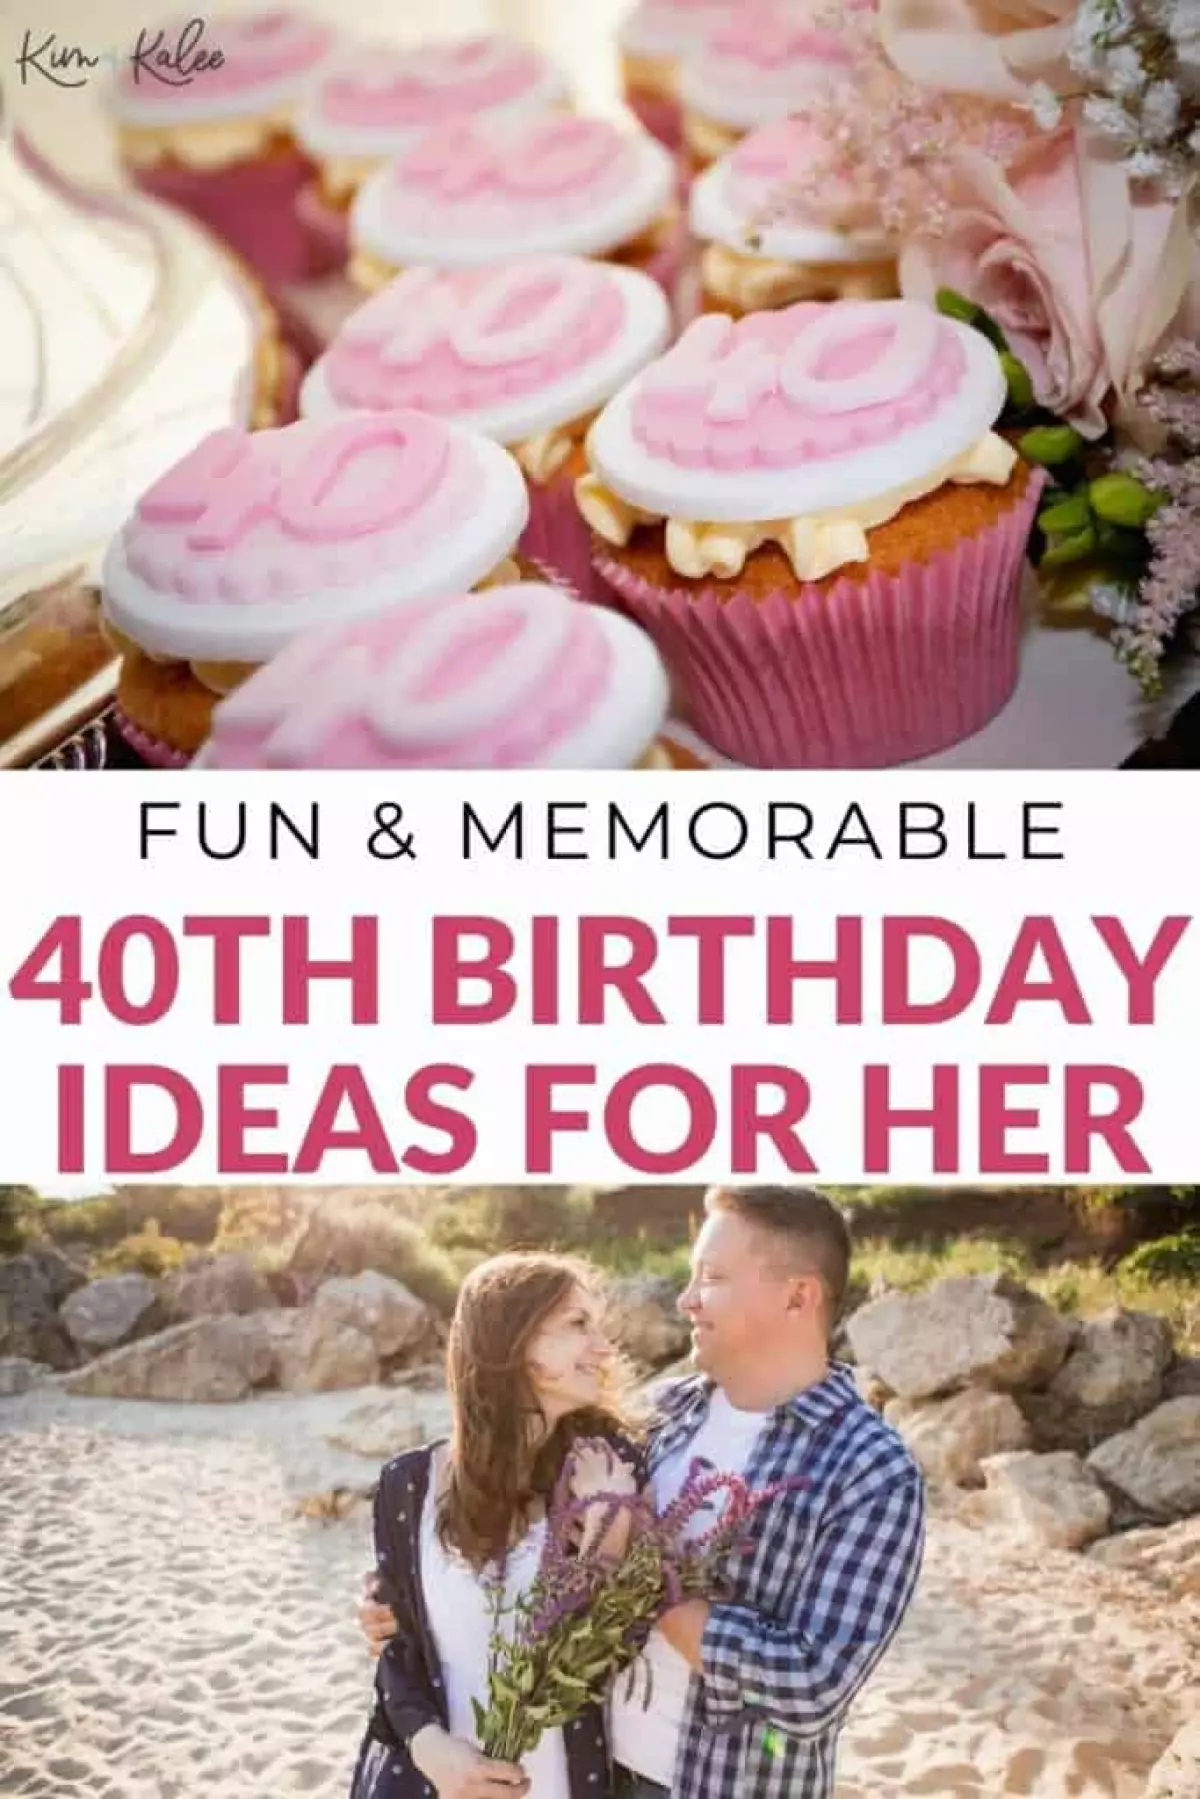 Cupcakes and a happy couple with the words "40th birthday ideas for your wife" overlayed